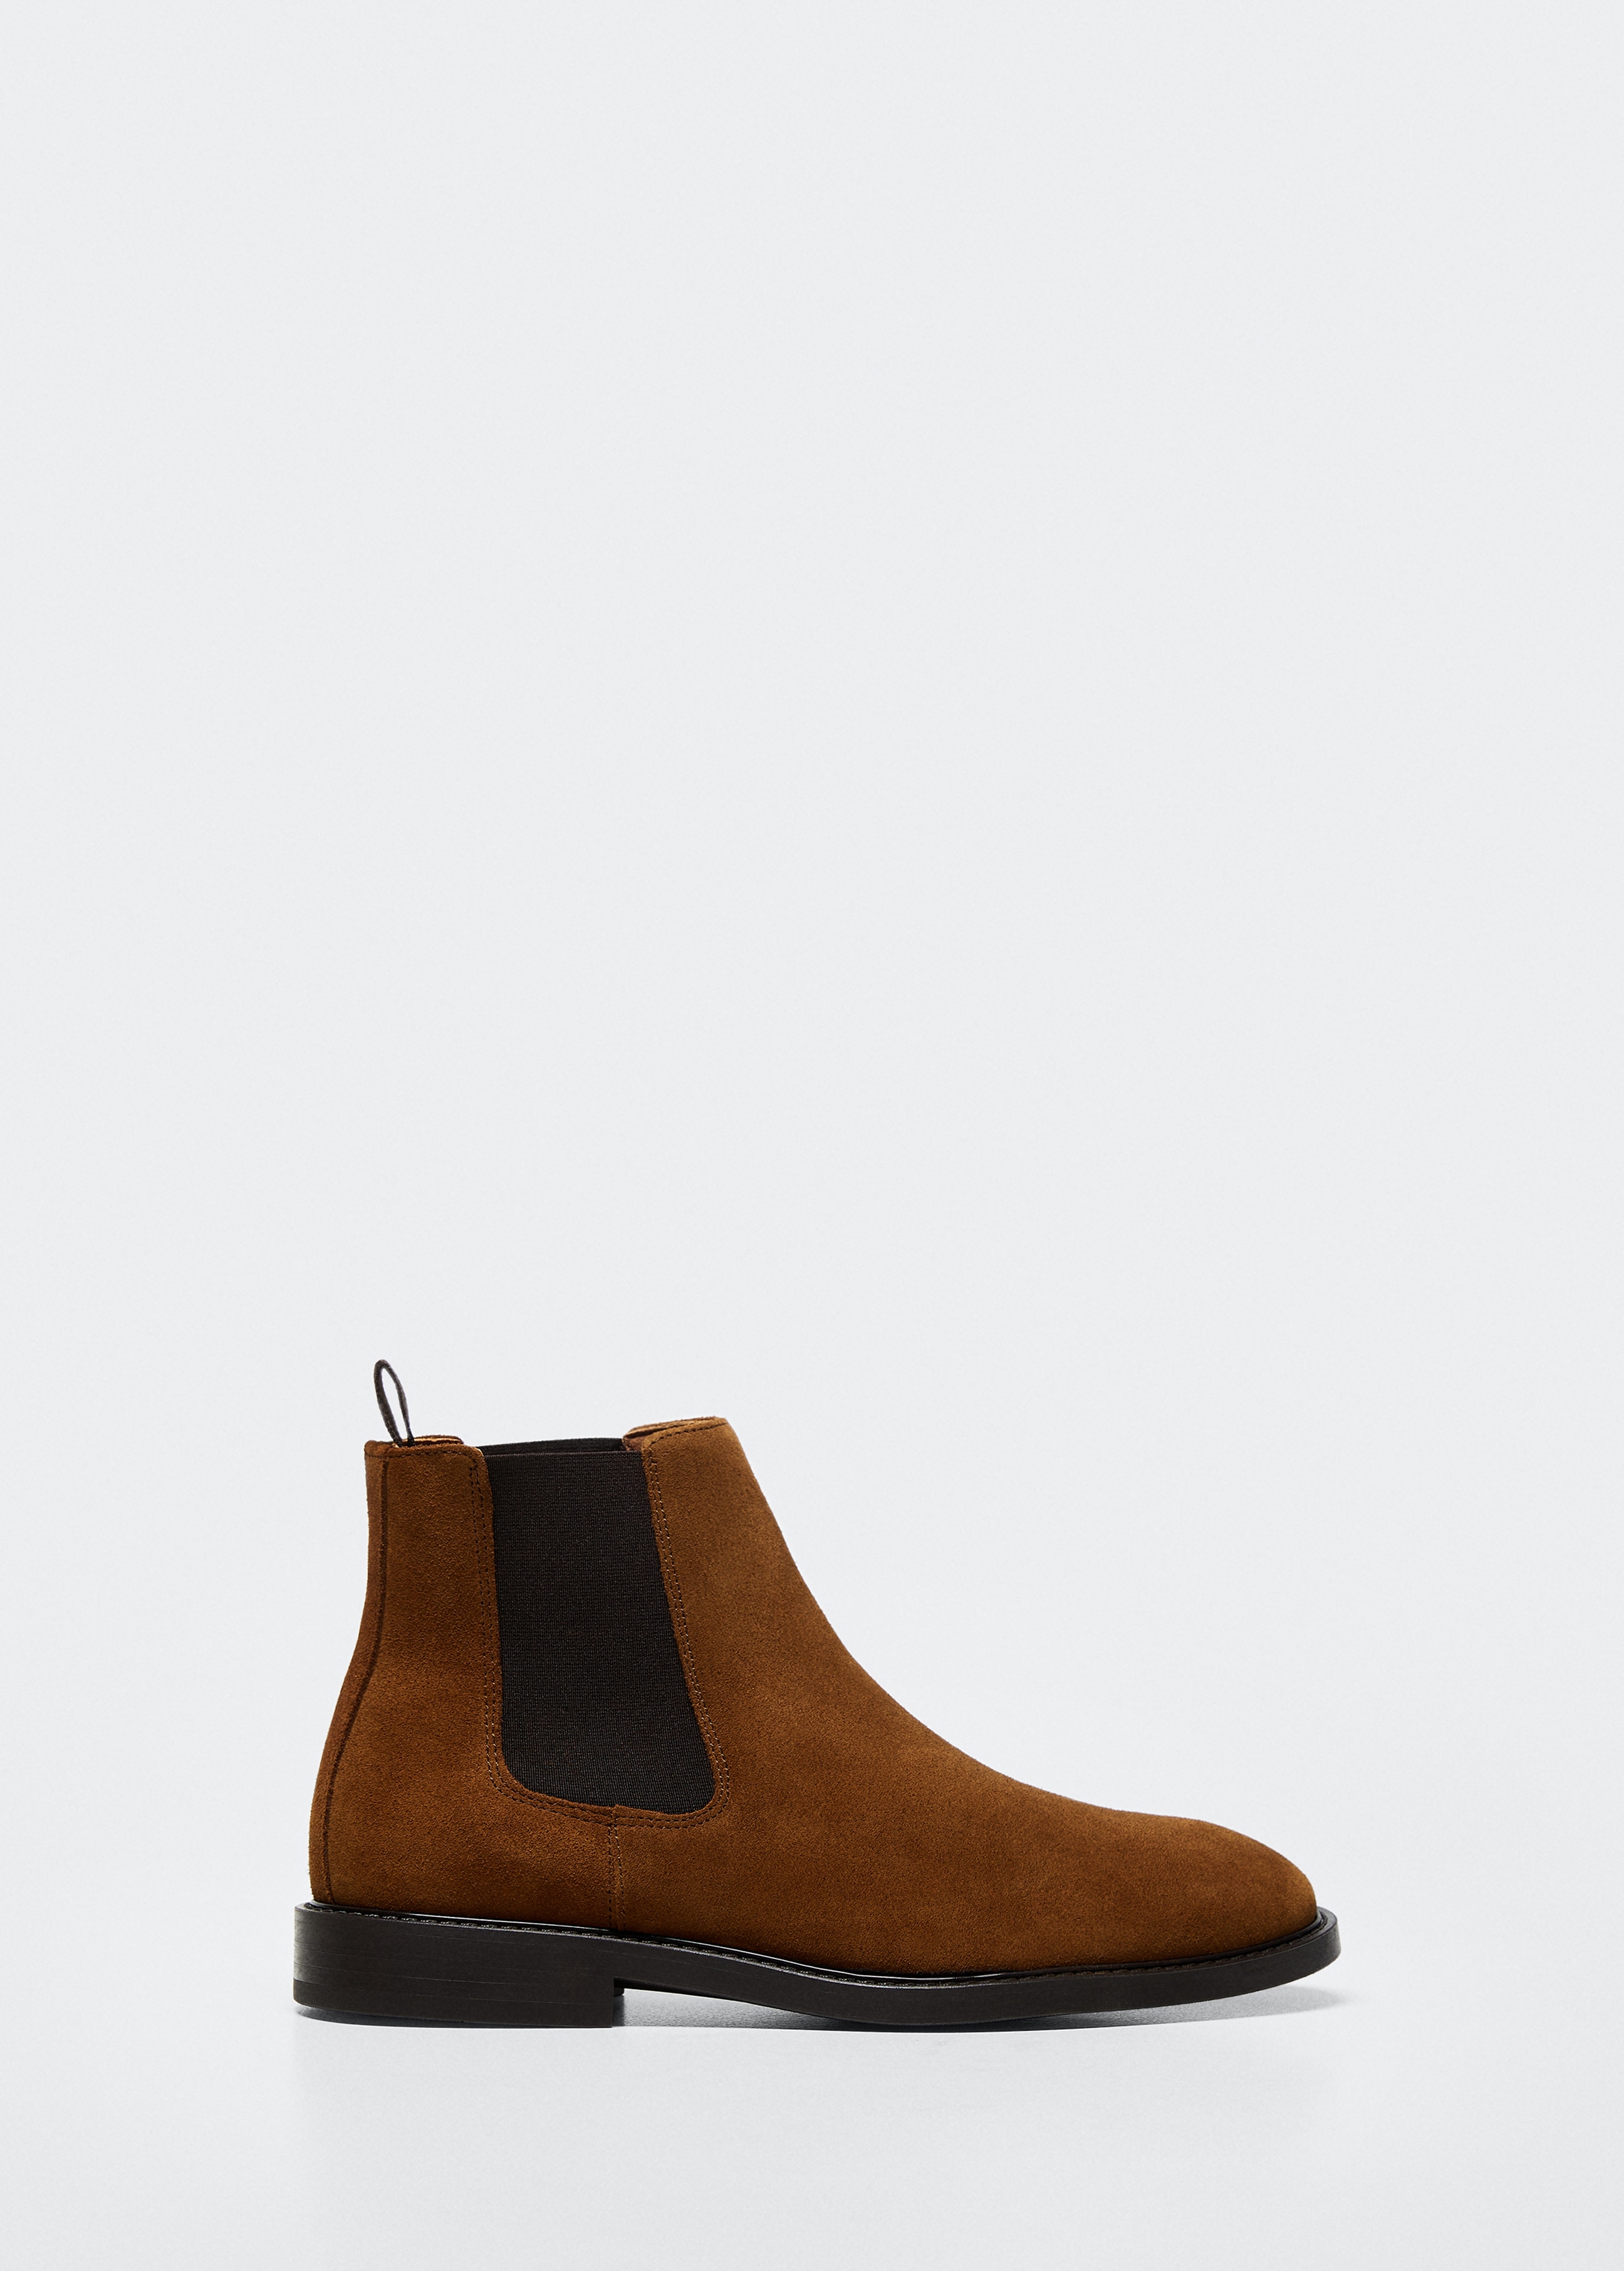 Suede Chelsea ankle boots - Article without model